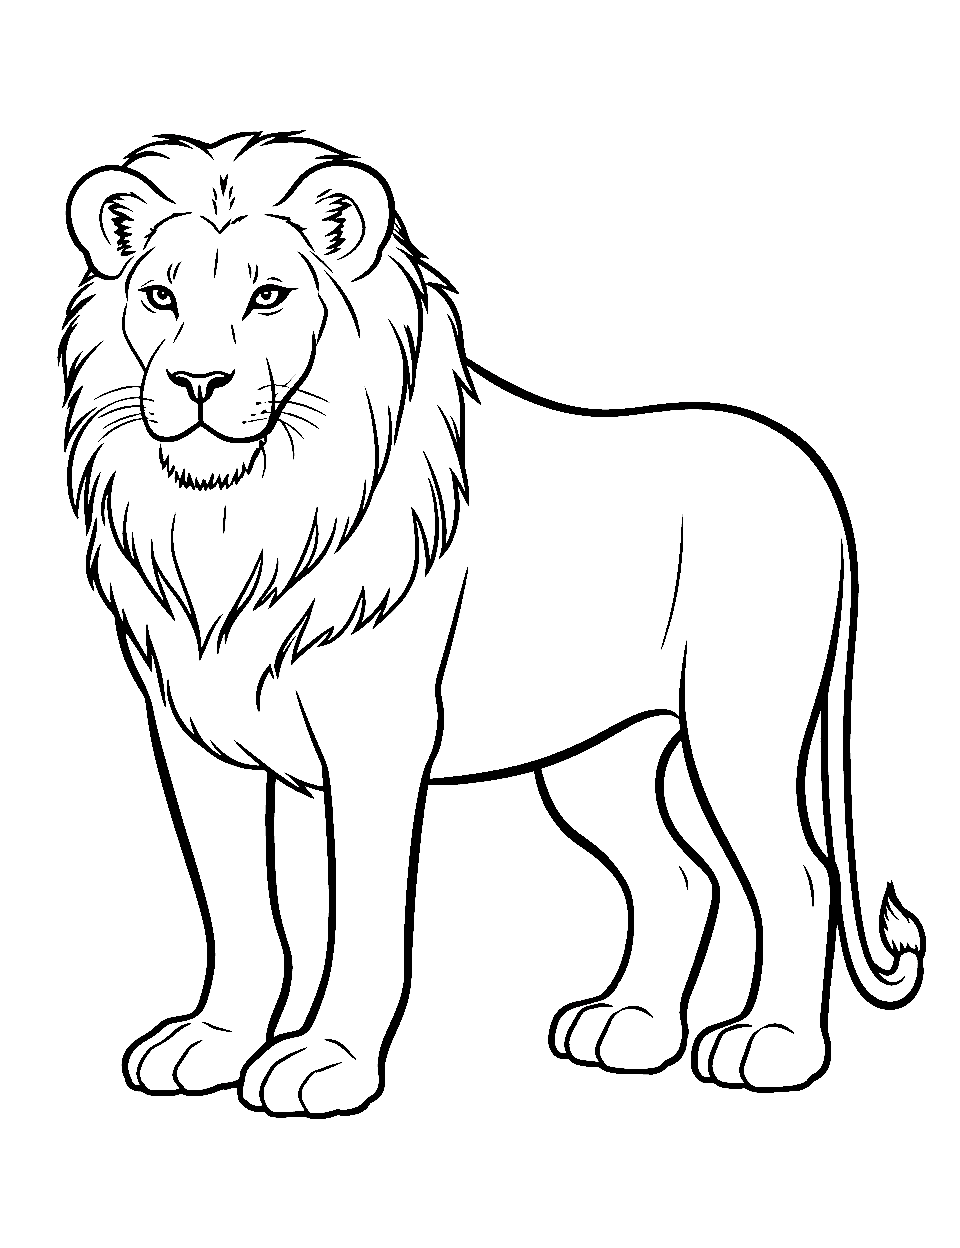 25 Lion Coloring Pages: Free Printable Sheets